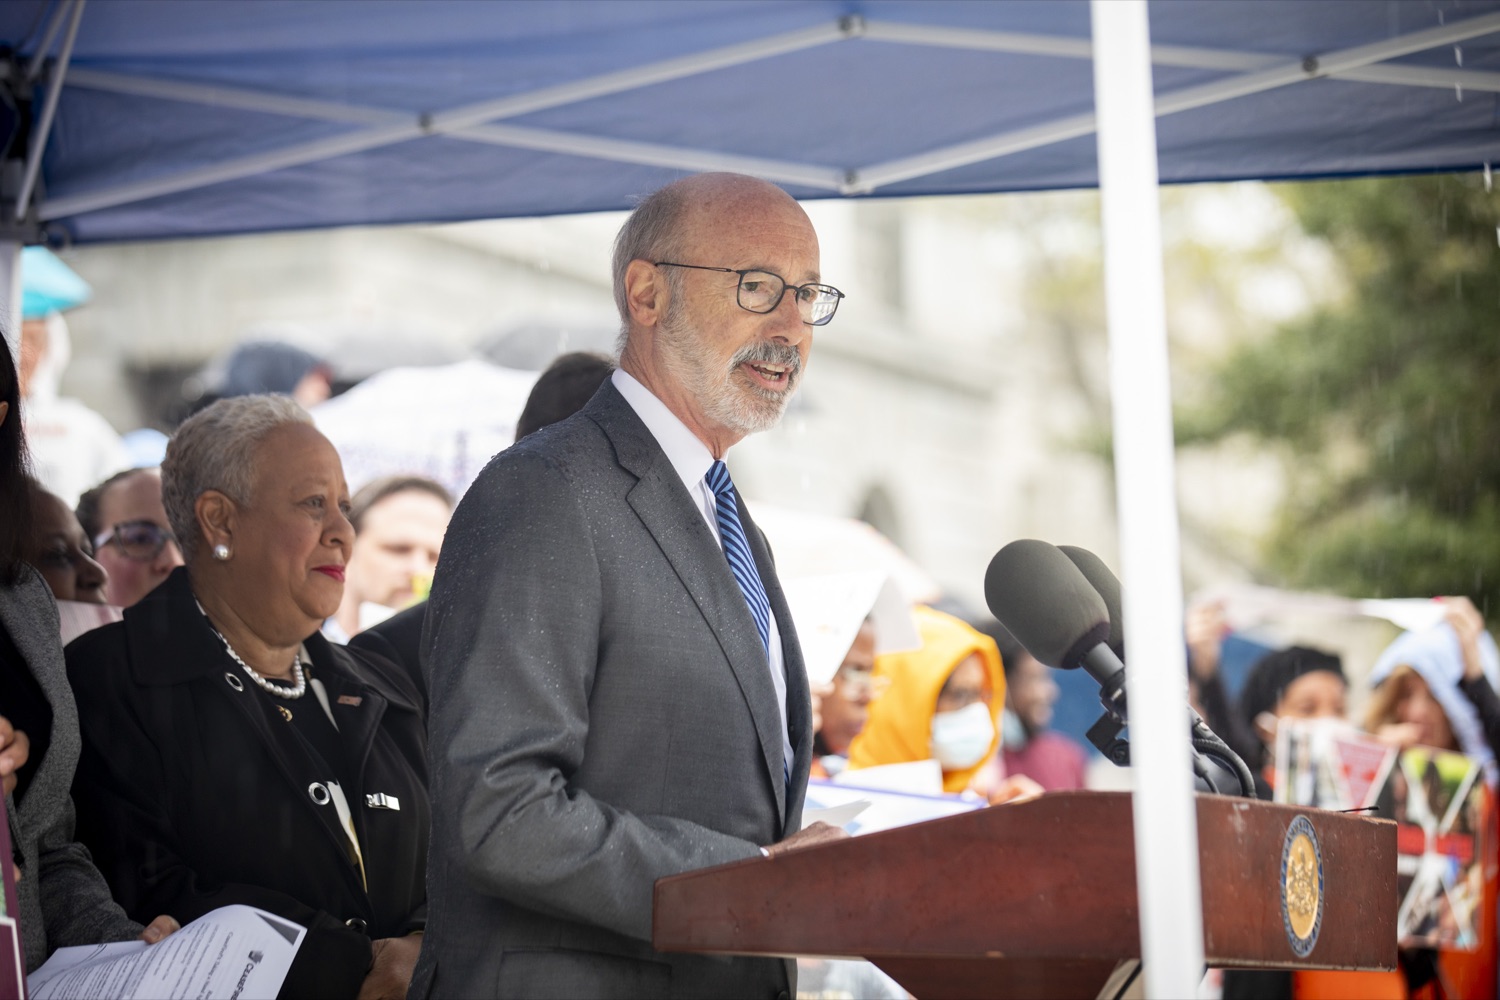 Governor Tom Wolf, joined by CeaseFirePA and more than 200 Pennsylvanians at the Capitol, calls for legislative action to save lives against gun violence, in Harrisburg, PA on April 26, 2022.<br><a href="https://filesource.amperwave.net/commonwealthofpa/photo/20782_gov_ceaseFirePA_13.JPG" target="_blank">⇣ Download Photo</a>